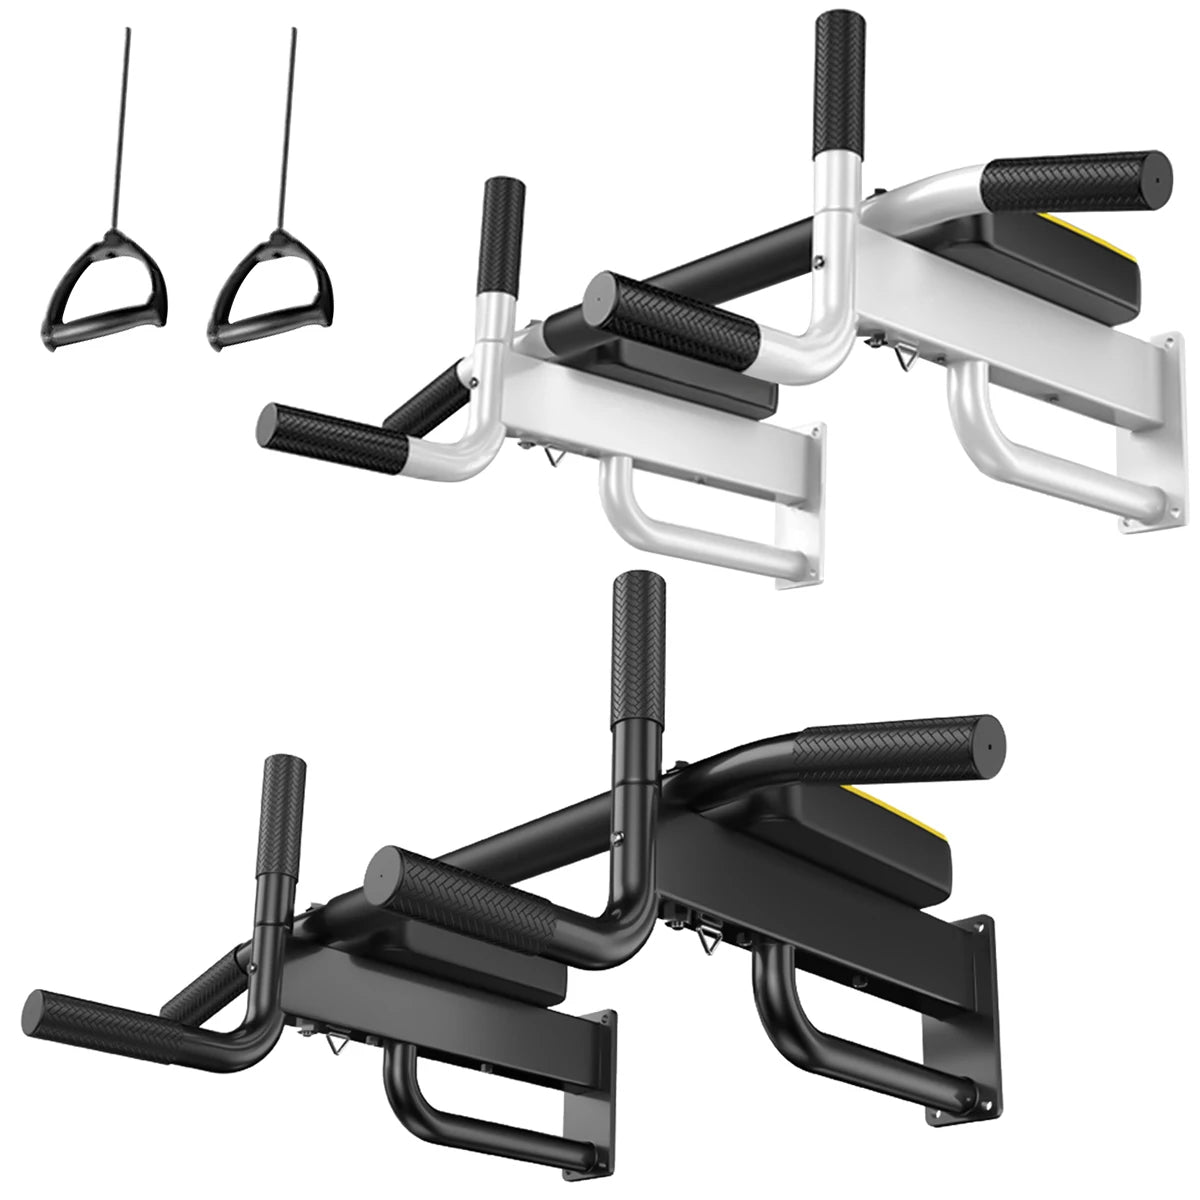 2 IN 1 Fit Pull Up Bar Traction bar Wall Pull-up Bar/Sport Gym Equipment Fitness Equipment Yoga